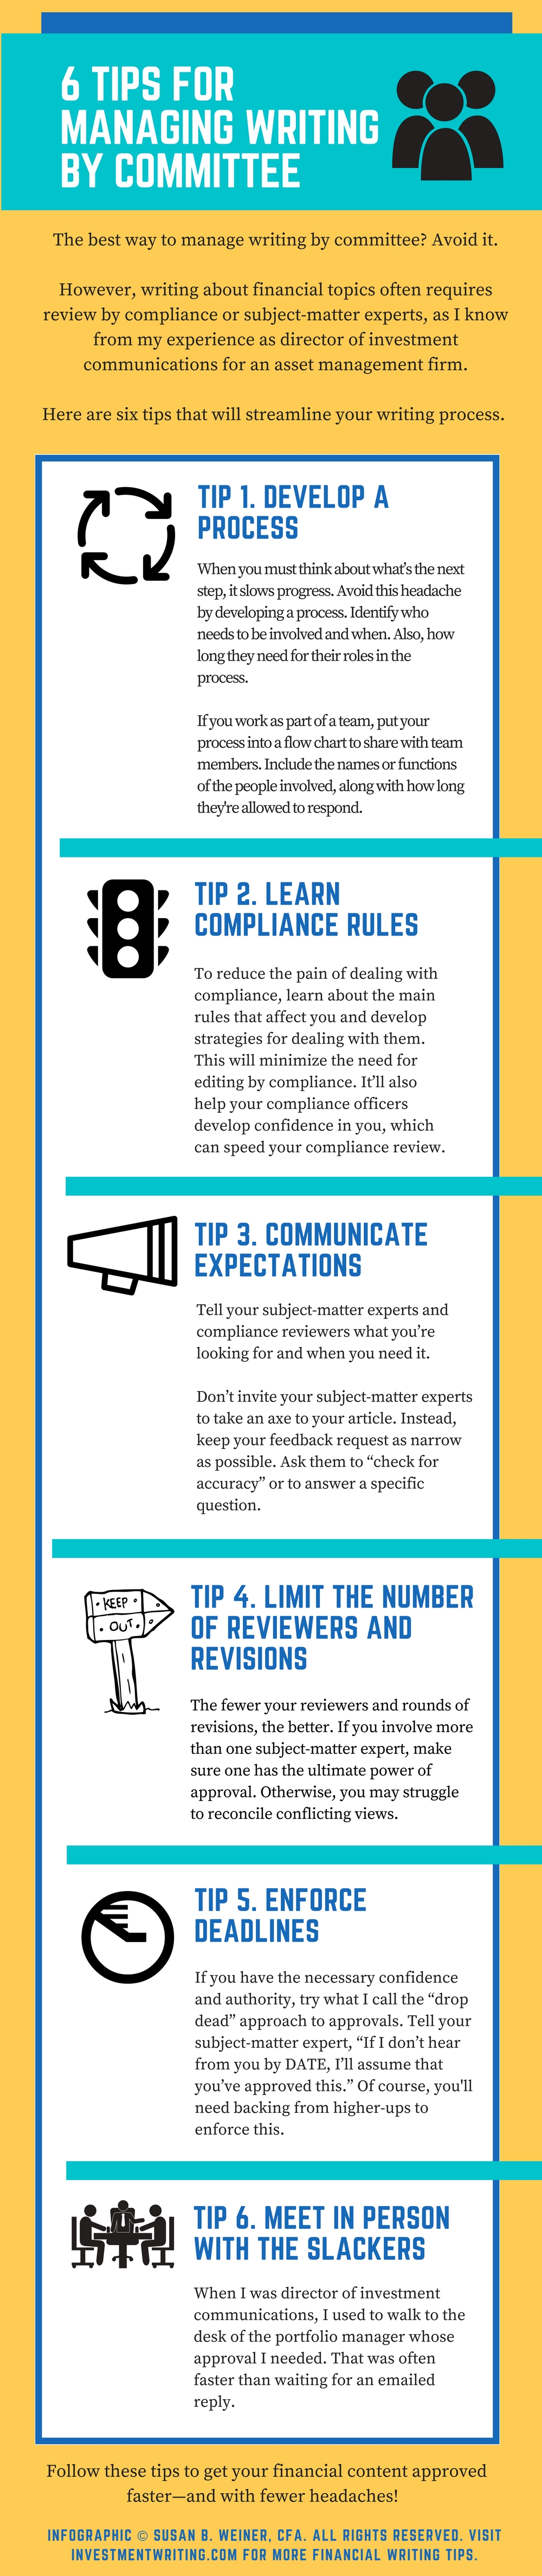 6 Tips Infographic #2